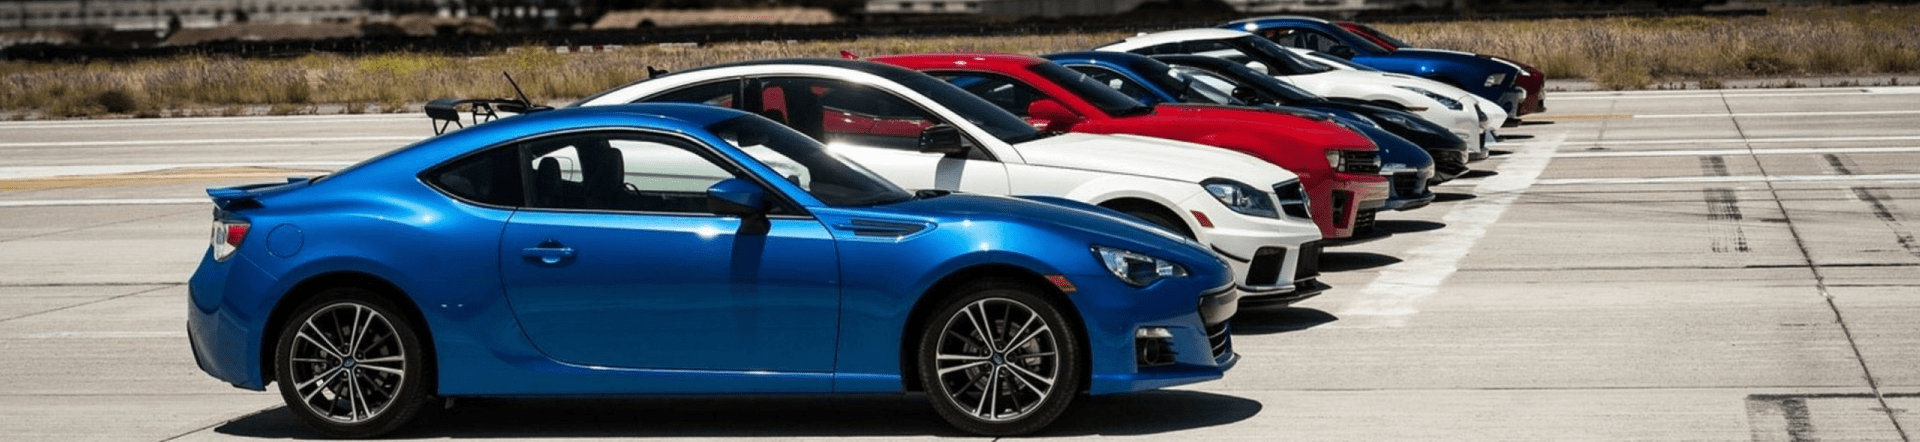 New cars and used care lined up at Brisbane Car Brokers